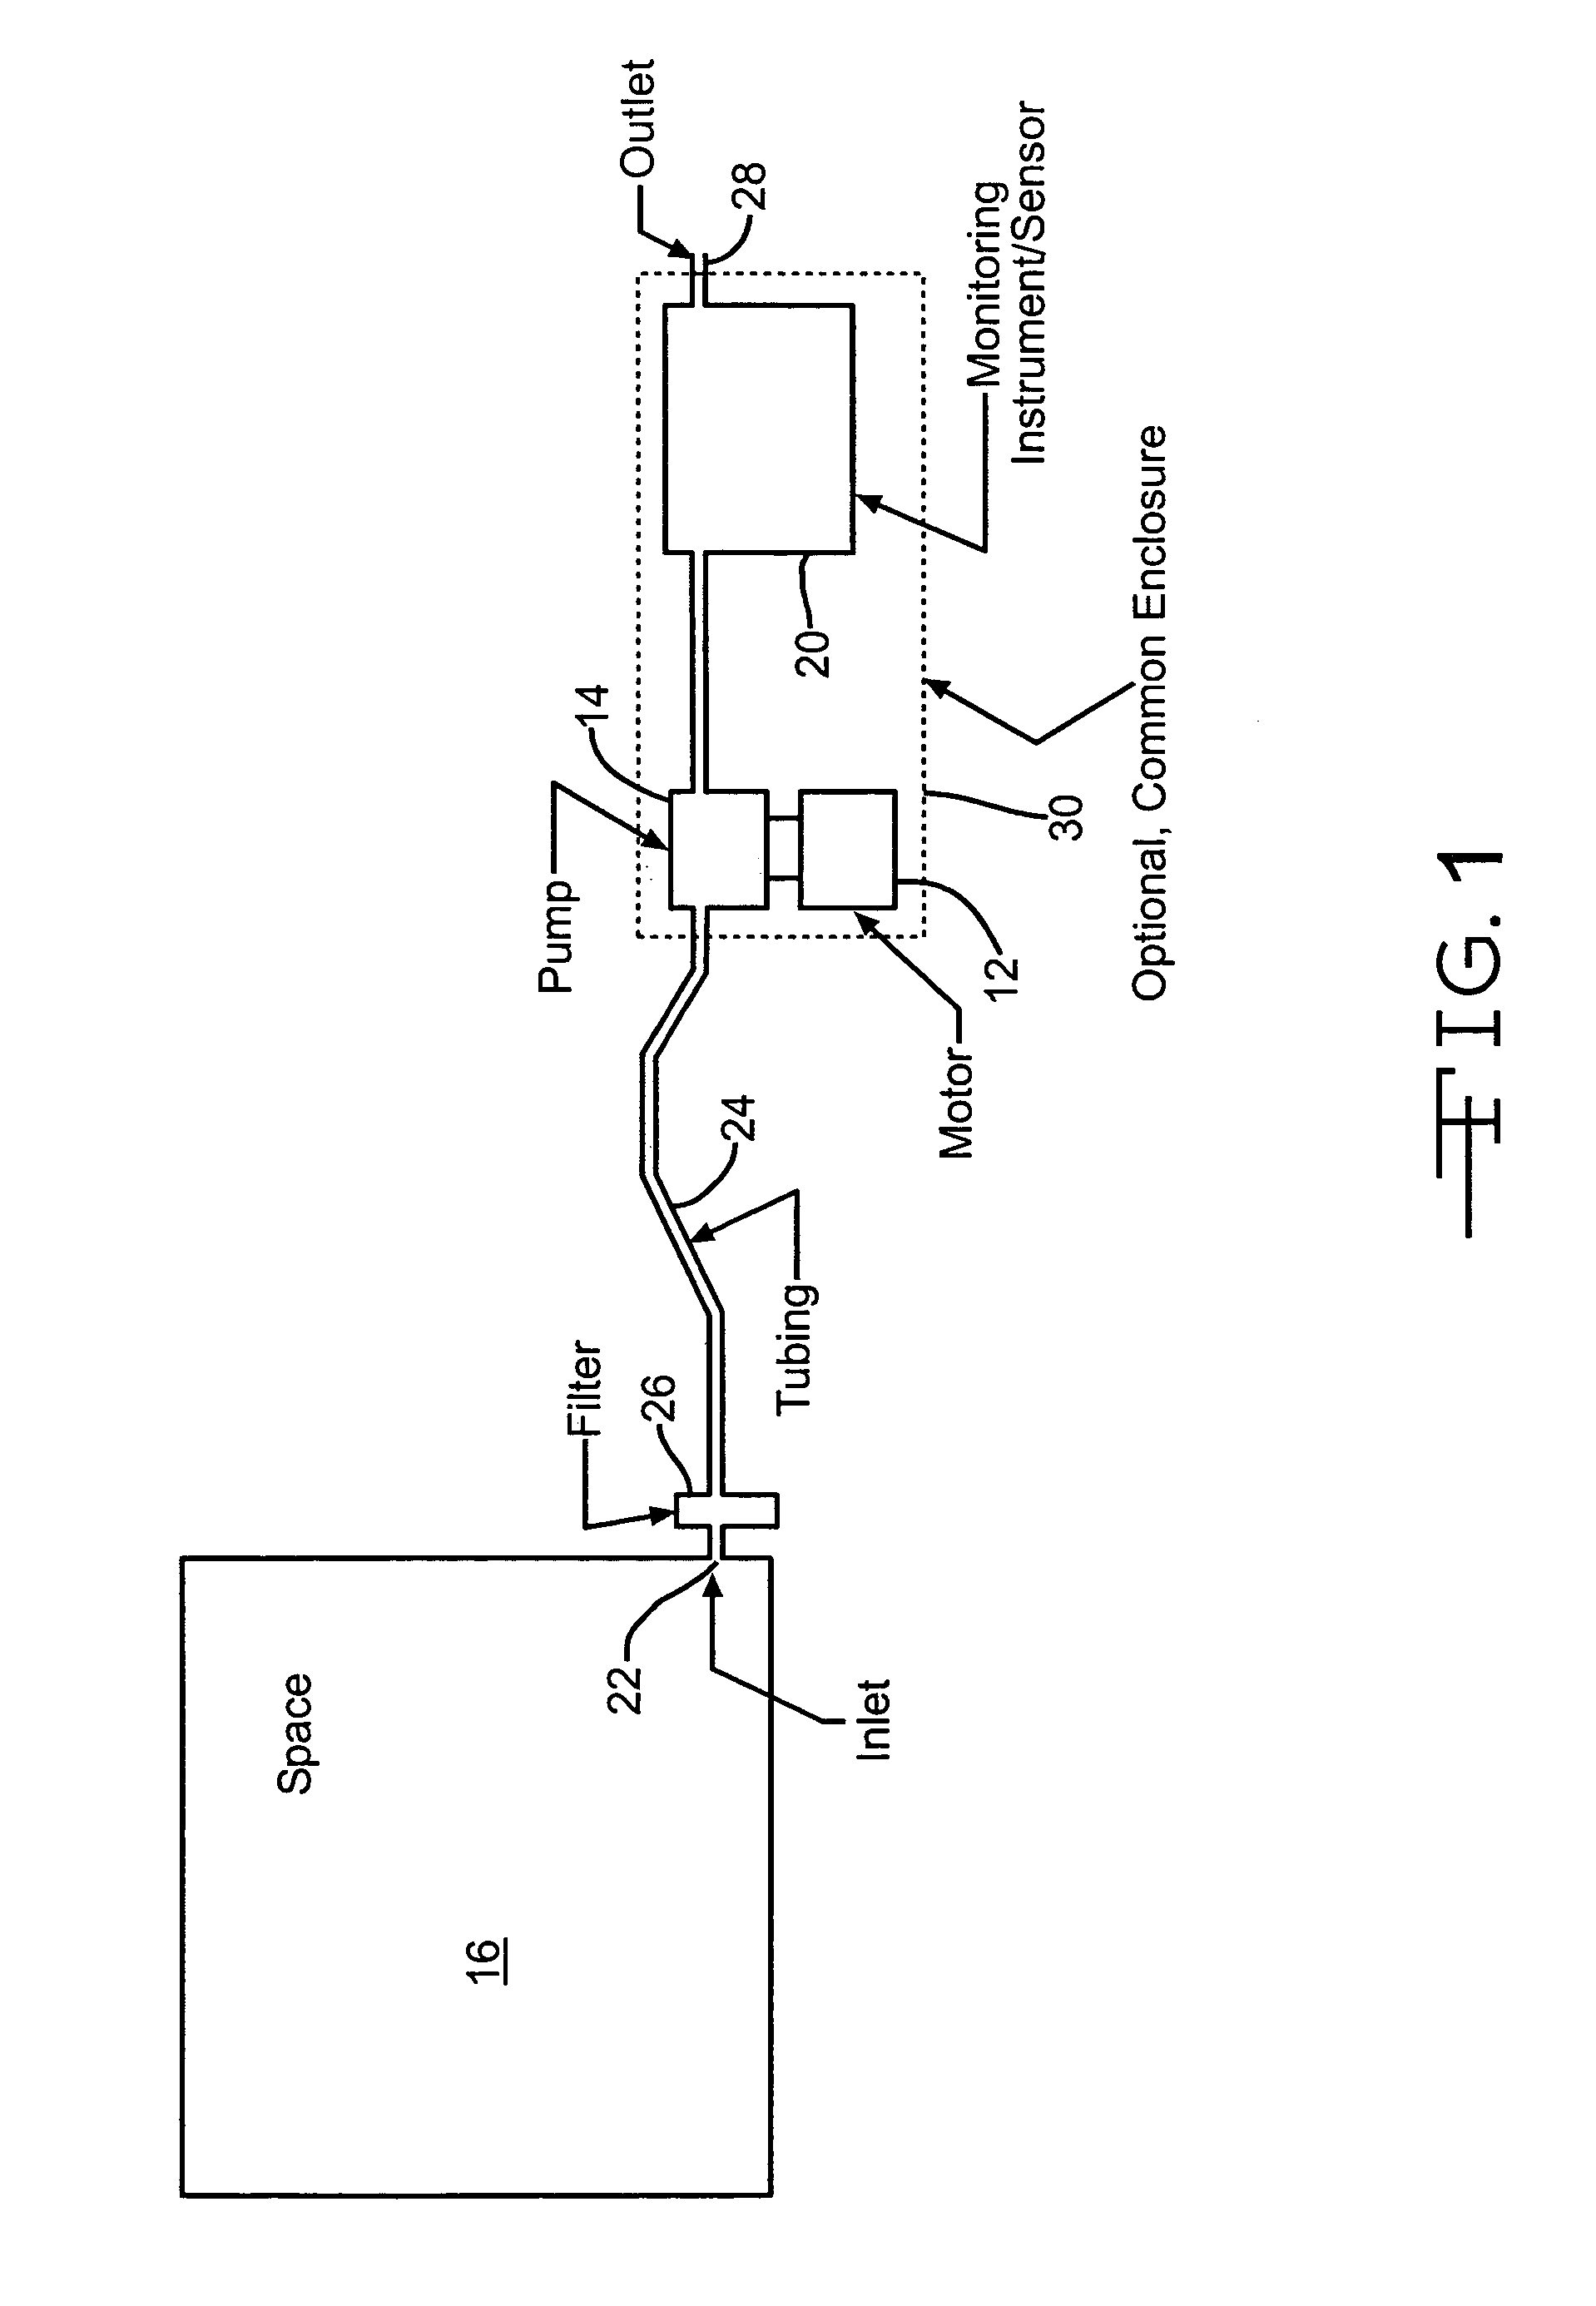 Speed and fluid flow controller